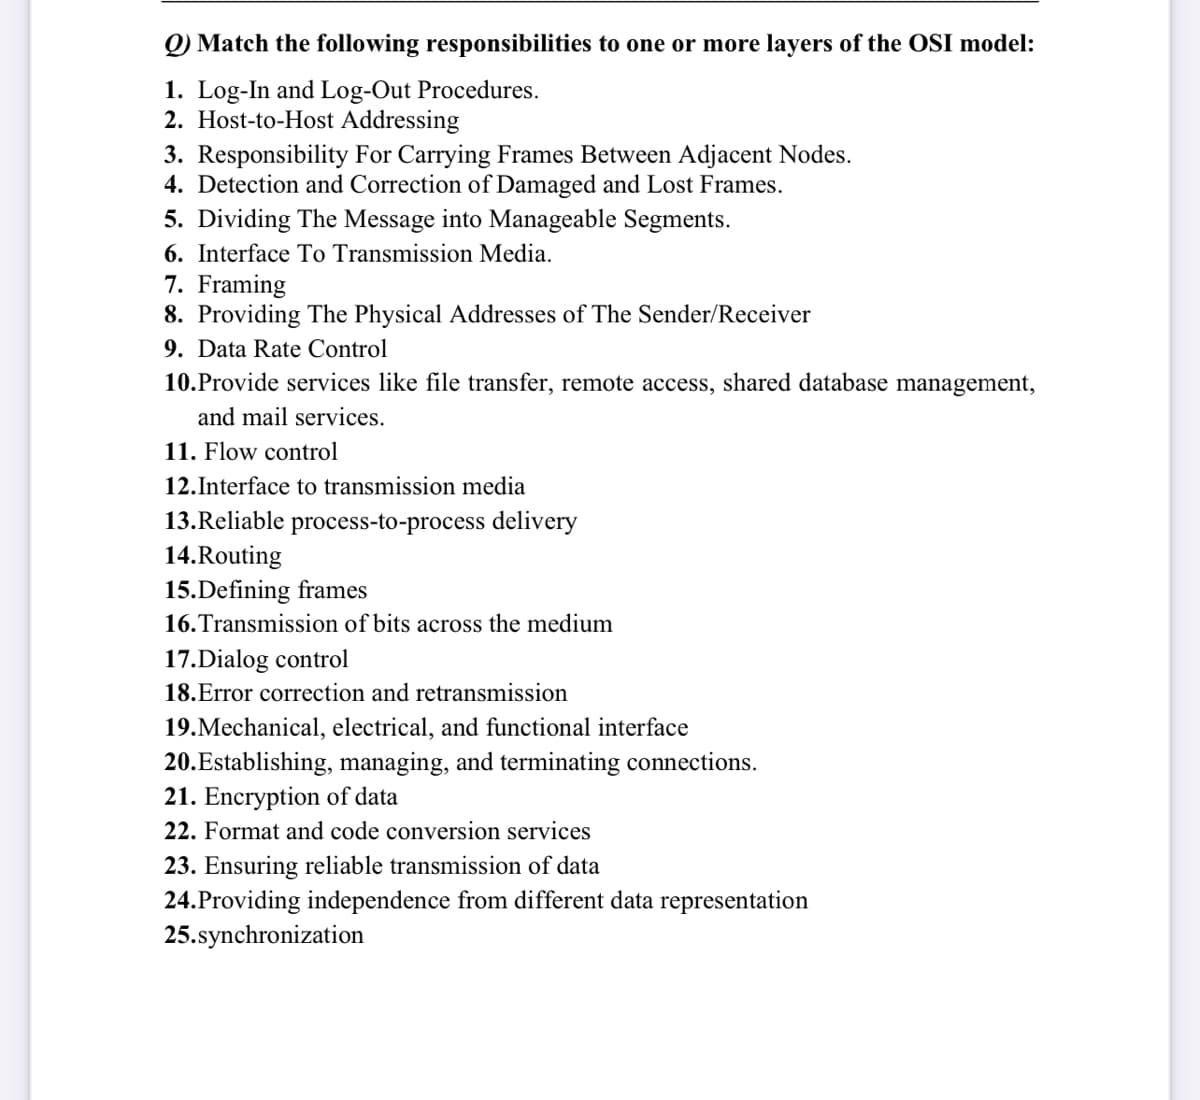 Q) Match the following responsibilities to one or more layers of the OSI model:
1. Log-In and Log-Out Procedures.
2. Host-to-Host Addressing
3. Responsibility For Carrying Frames Between Adjacent Nodes.
4. Detection and Correction of Damaged and Lost Frames.
5. Dividing The Message into Manageable Segments.
6. Interface To Transmission Media.
7. Framing
8. Providing The Physical Addresses of The Sender/Receiver
9. Data Rate Control
10. Provide services like file transfer, remote access, shared database management,
and mail services.
11. Flow control
12. Interface to transmission media
13.Reliable process-to-process delivery
14.Routing
15.Defining frames
16. Transmission of bits across the medium
17.Dialog control
18.Error correction and retransmission
19. Mechanical, electrical, and functional interface
20.Establishing, managing, and terminating connections.
21. Encryption of data
22. Format and code conversion services
23. Ensuring reliable transmission of data
24.Providing independence from different data representation
25.synchronization